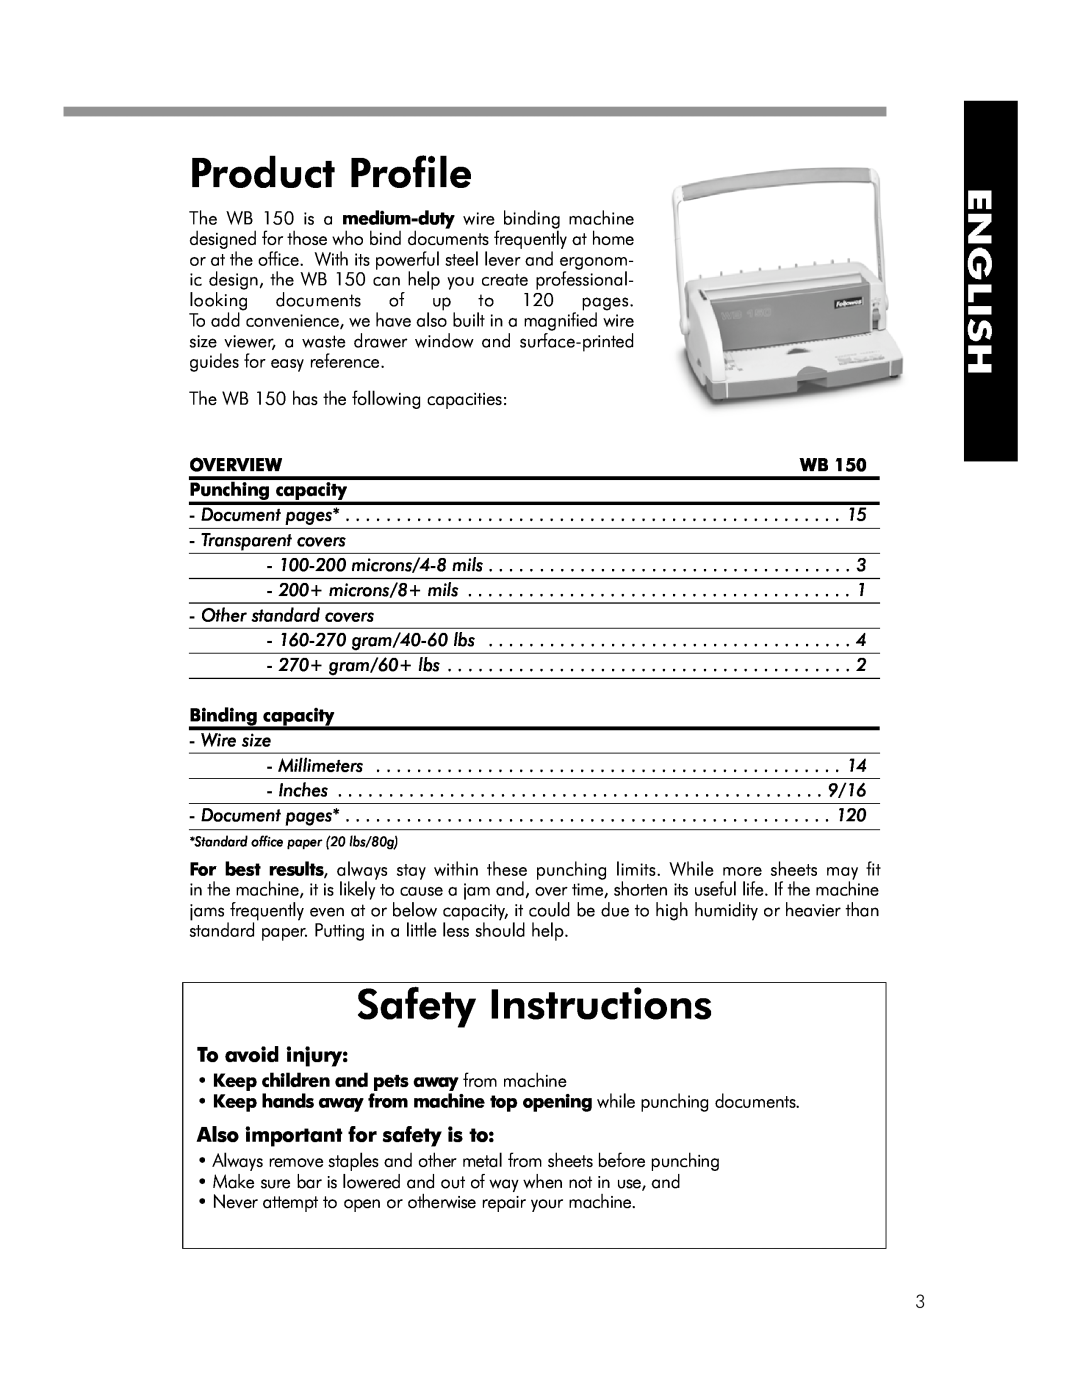 Fellowes WB 150 manual Product Profile, Safety Instructions, To avoid injury, Also important for safety is to, Overview 